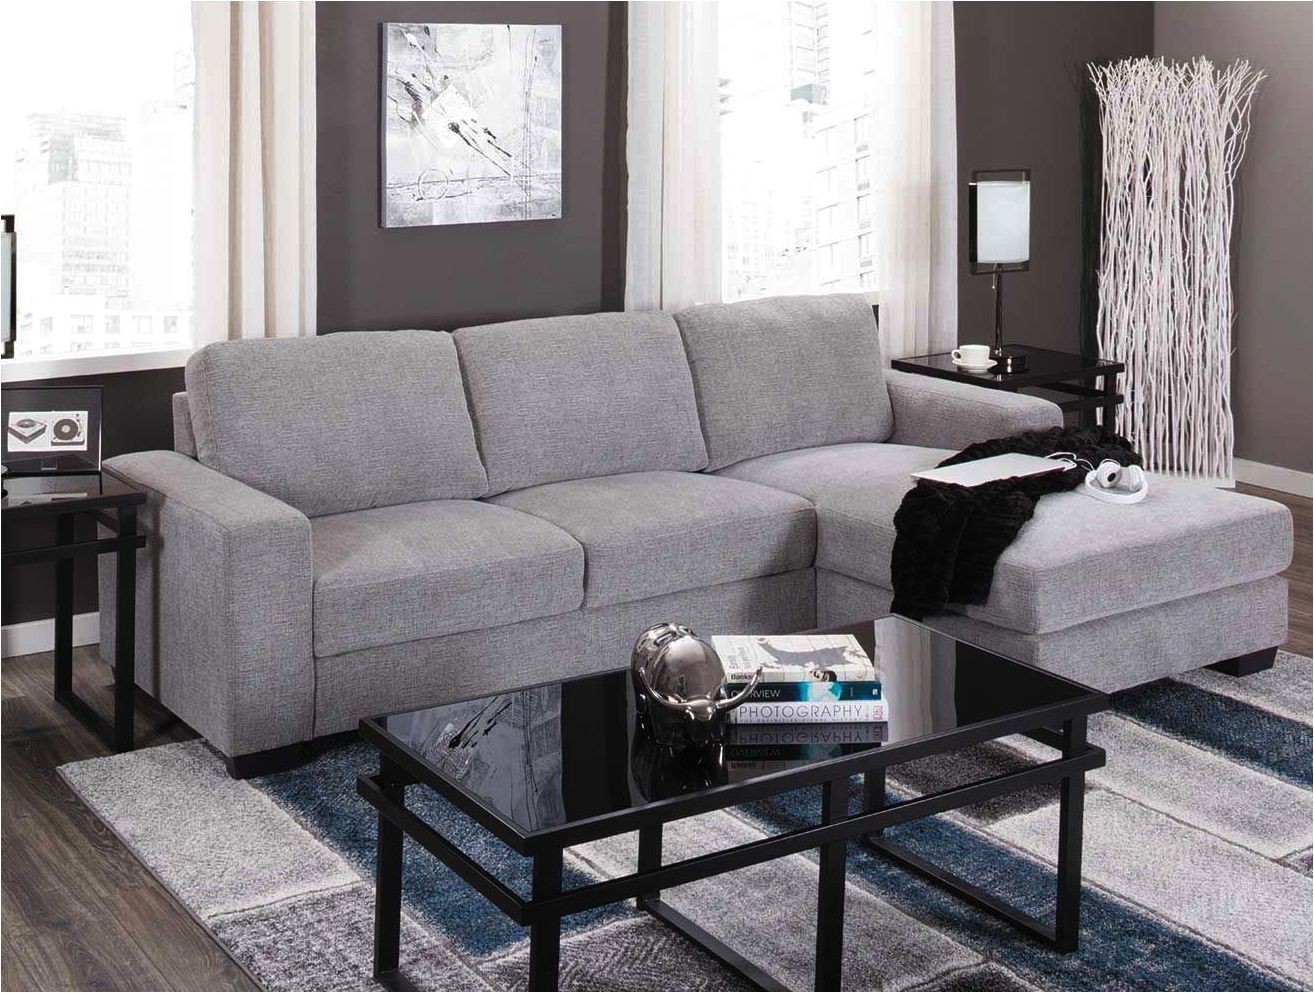 special at out lancaster pa showroom see our exclusive pricing on our website sofa chaise factory special in lancaster pa at unclaimed freight co